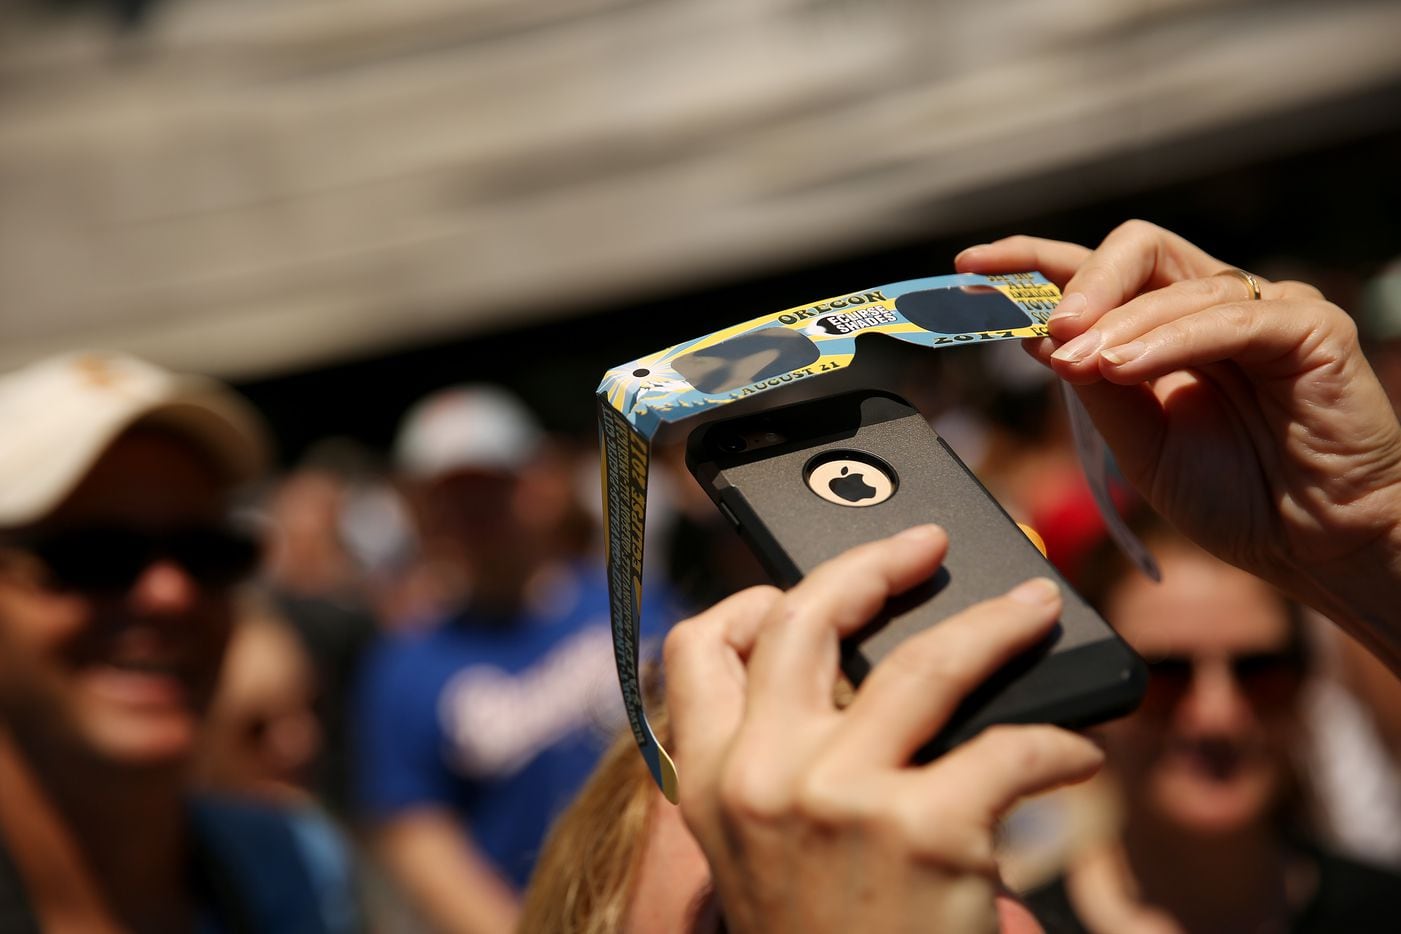 A person attempts to take a photograph of the sun through  pair of glasses during a solar eclipse outdoor watch party at the Perot Museum of Nature and Science.